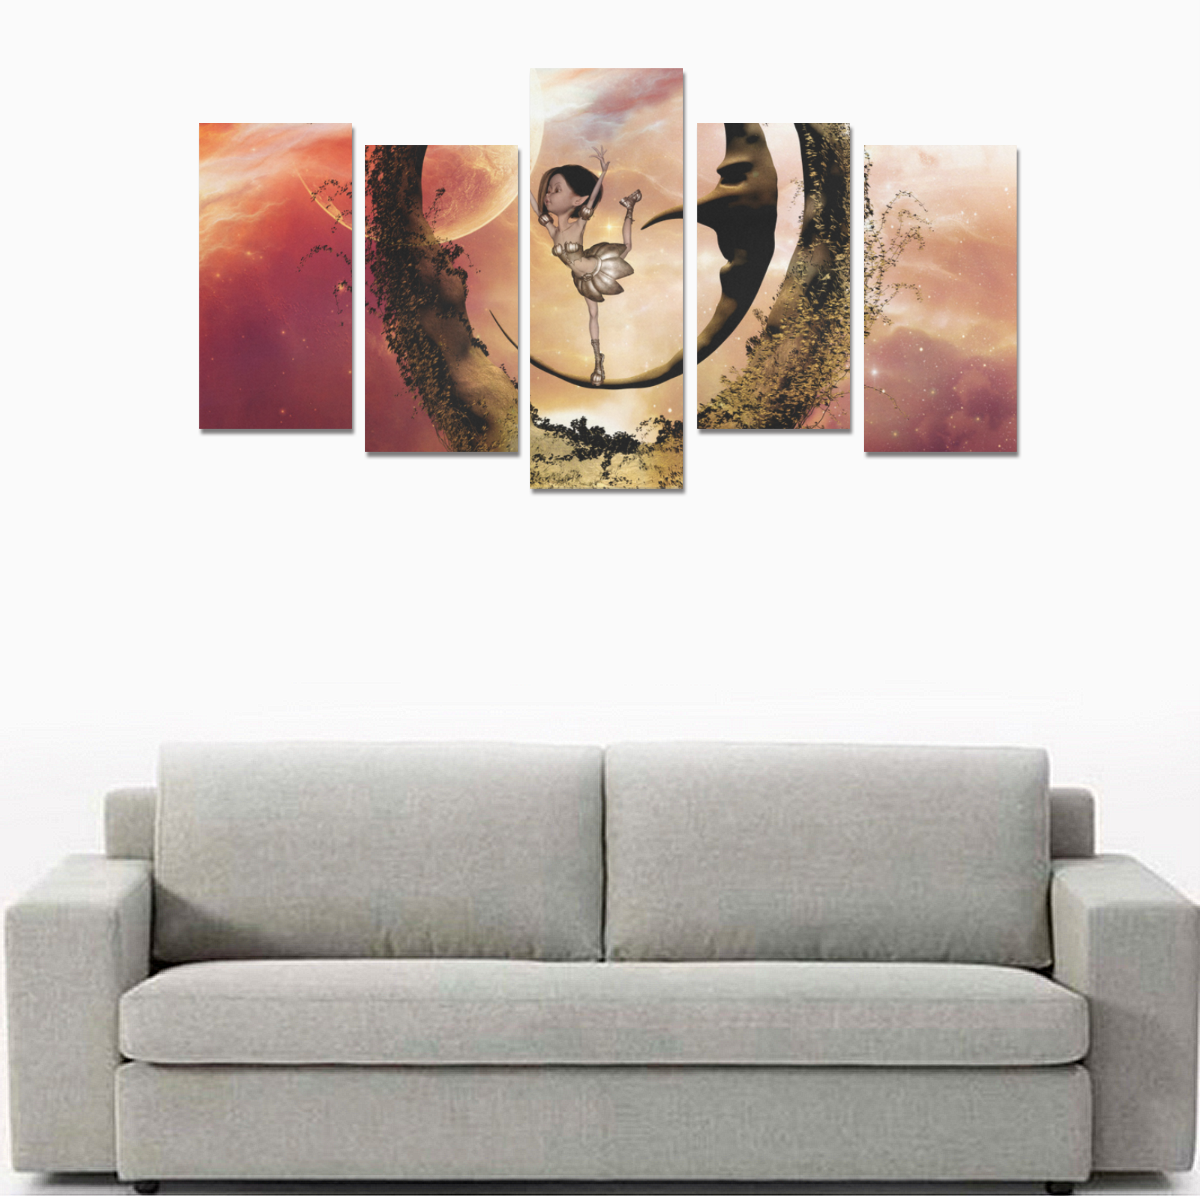 Dancing on the moon Canvas Print Sets E (No Frame)